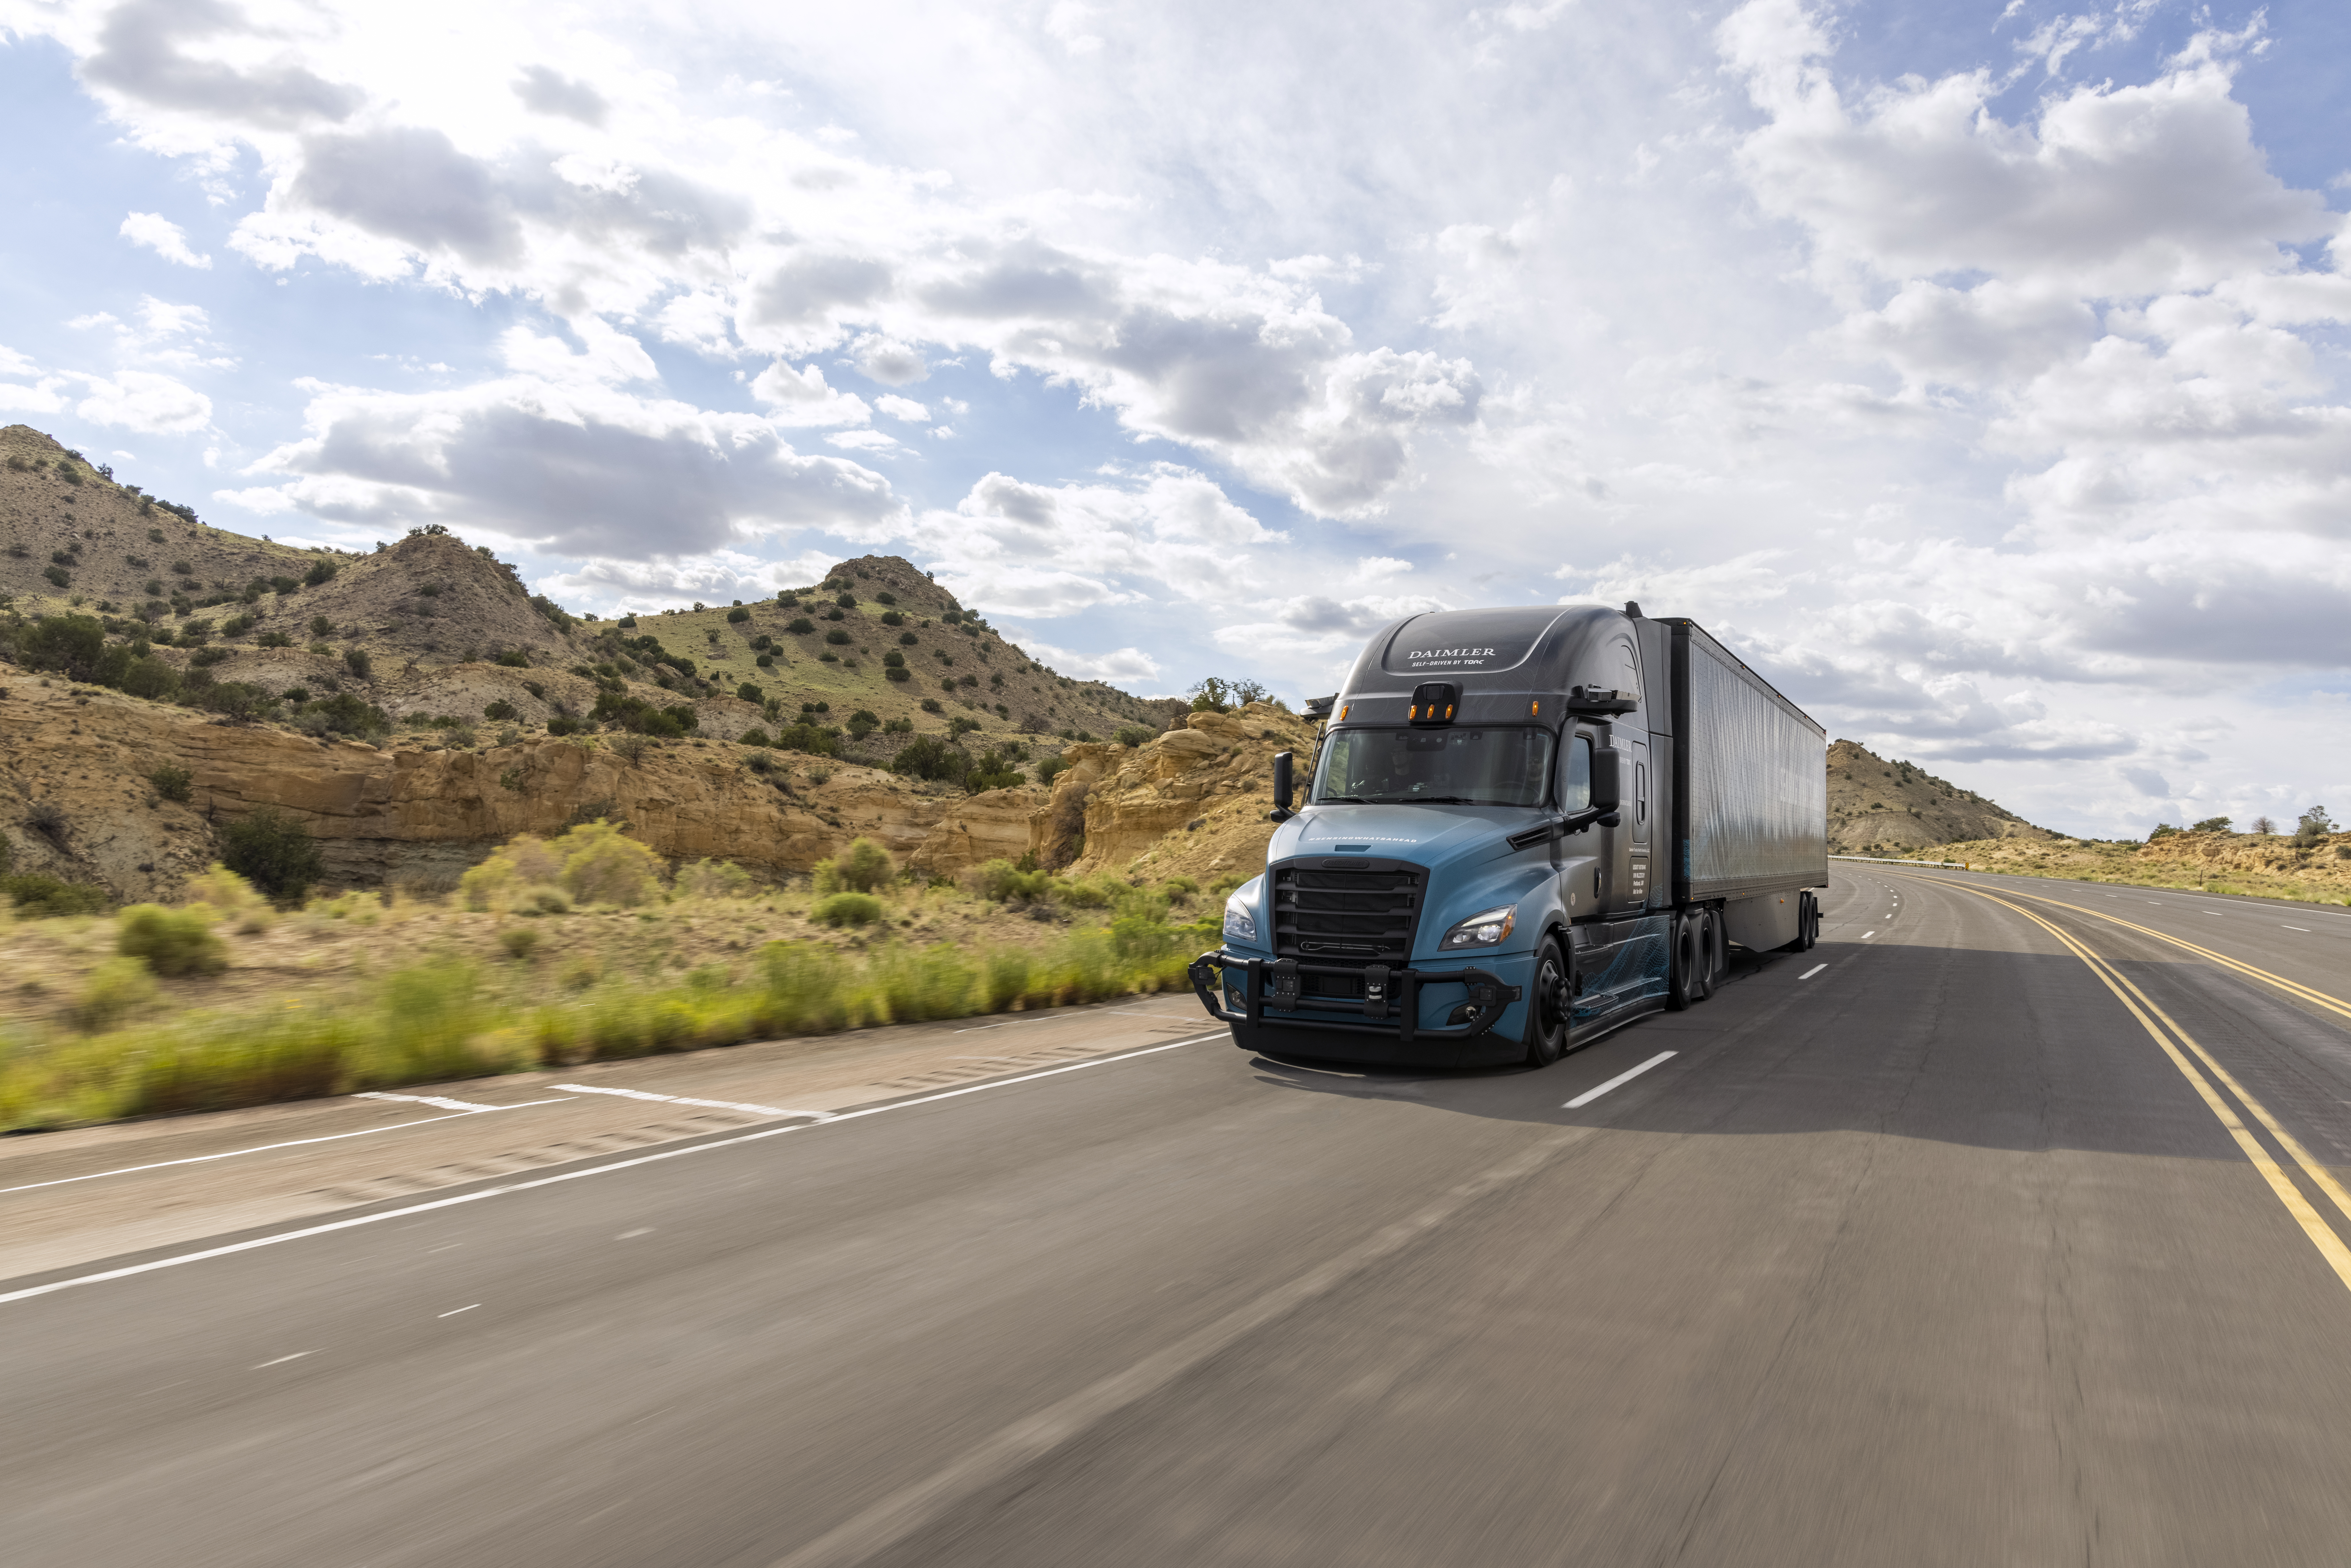 Torc self-driving freight truck driving on highway in desert